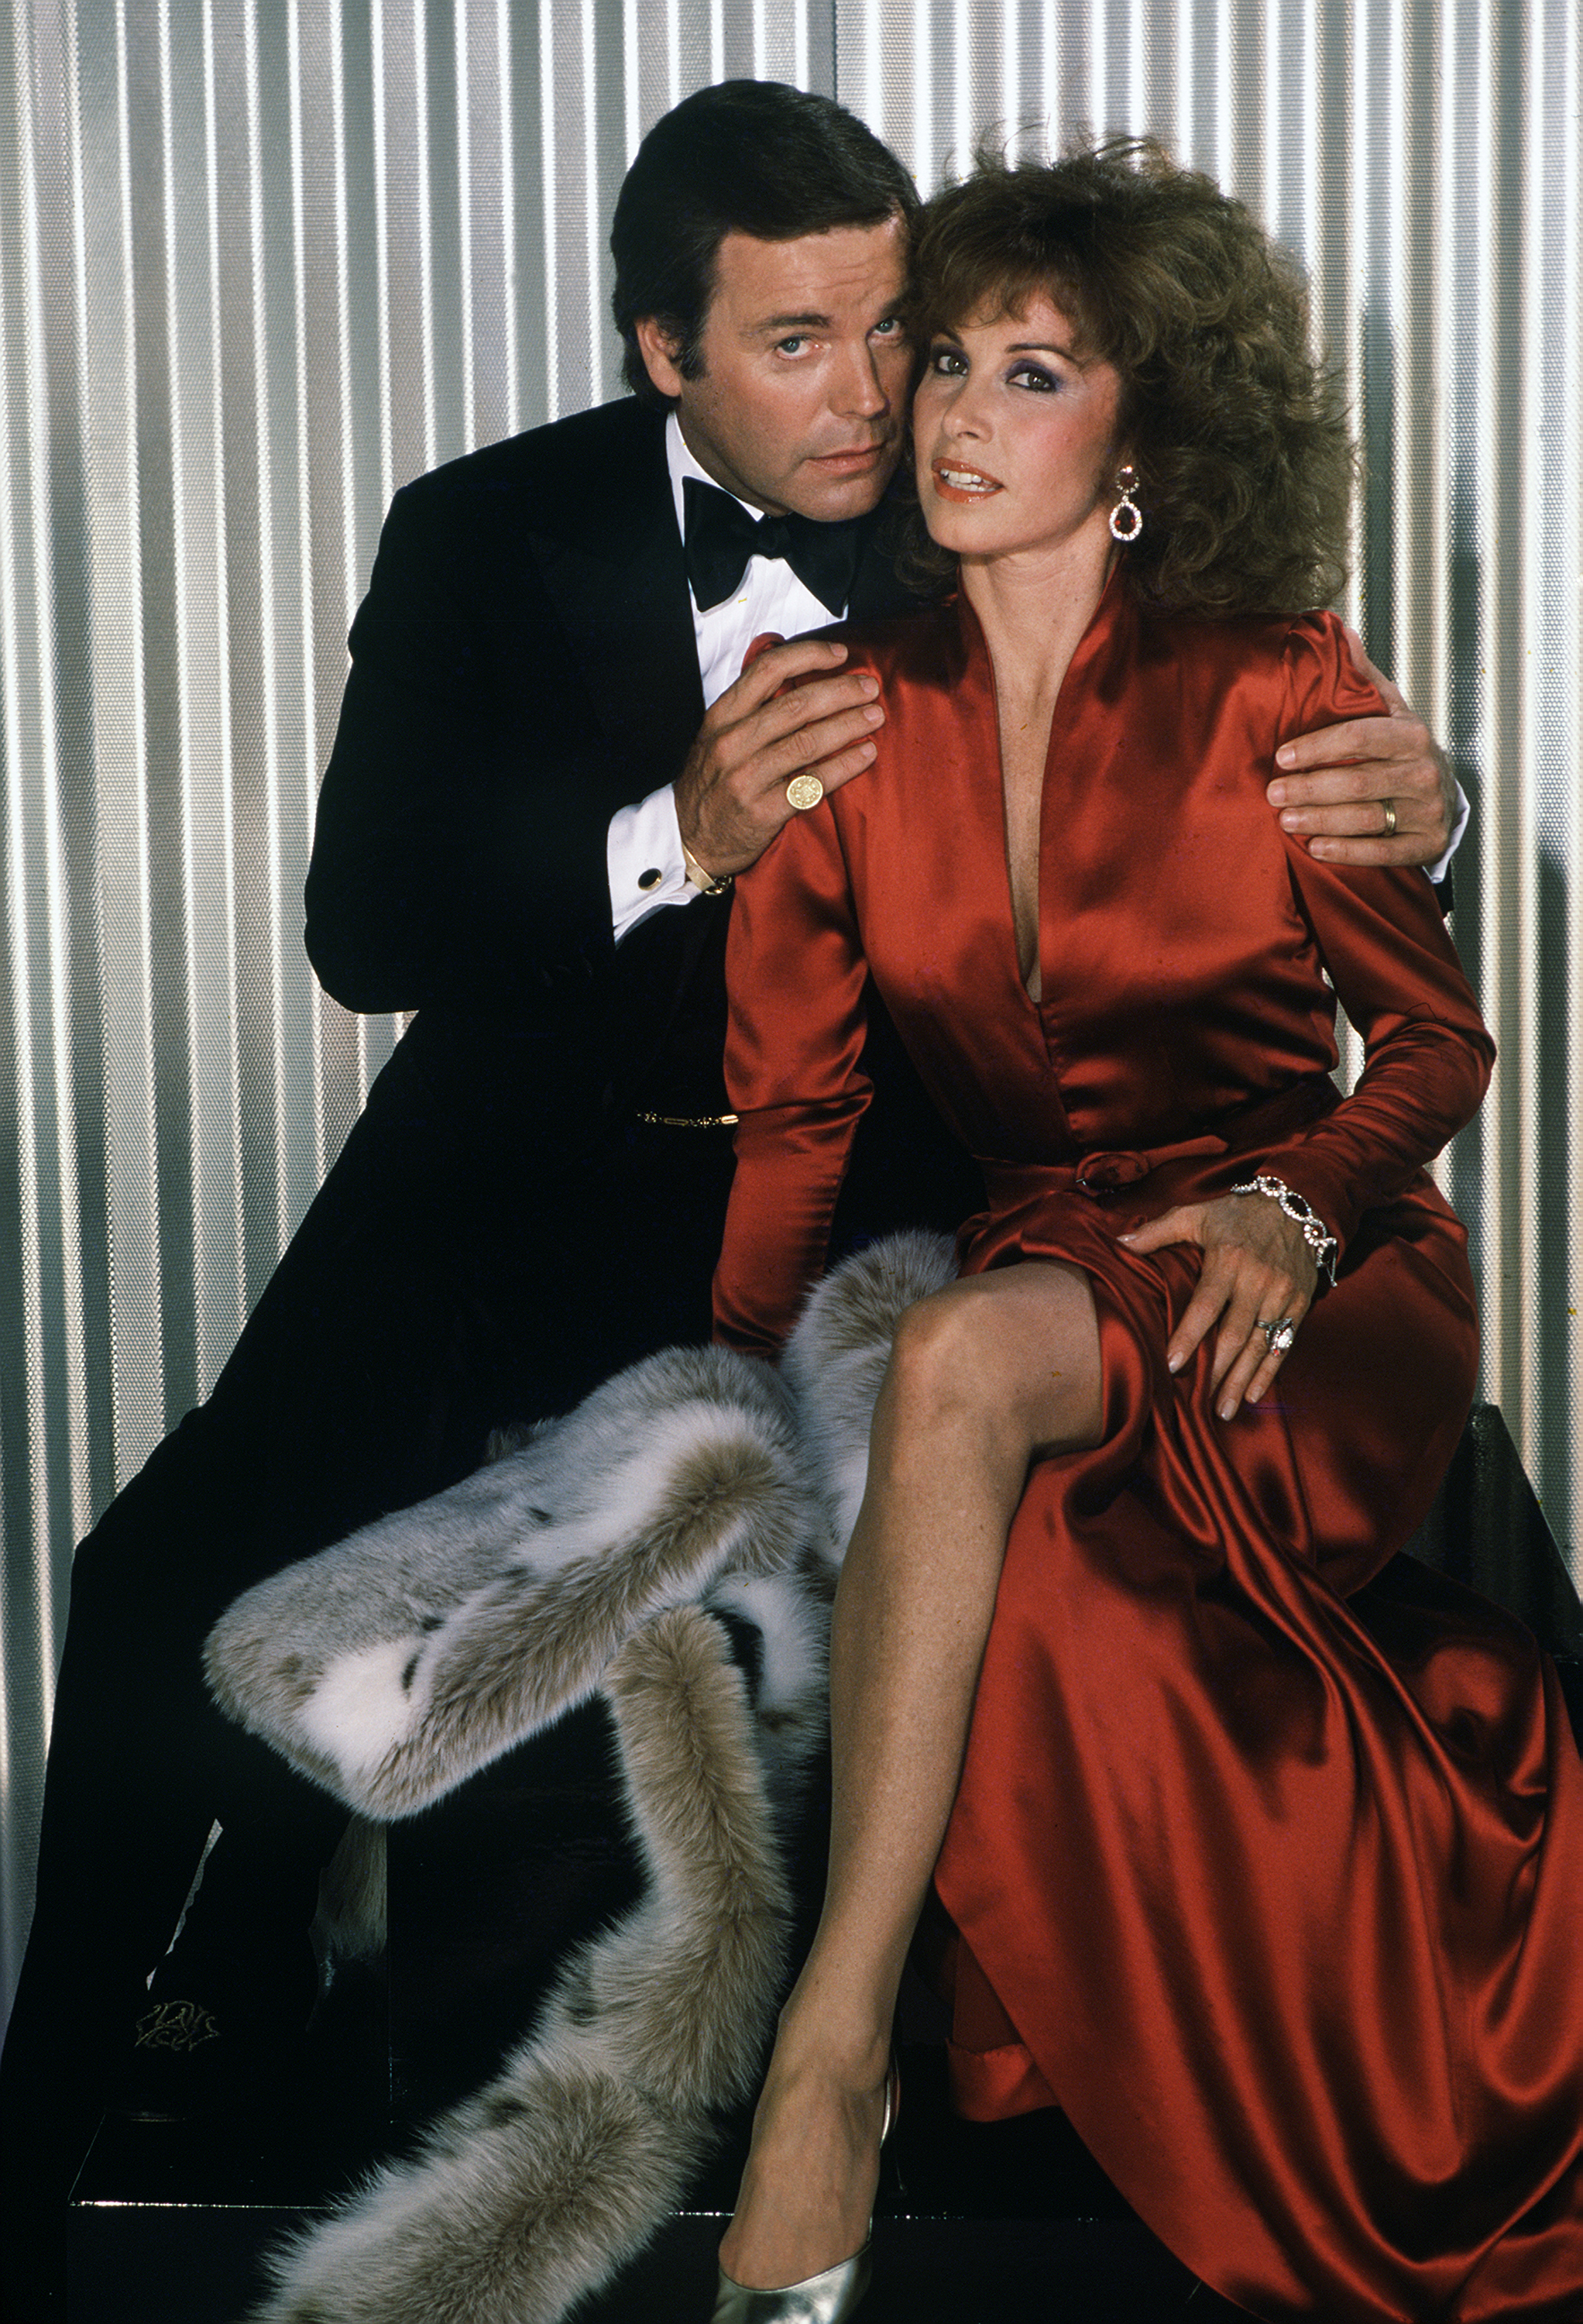 Stefanie Powers and Robert Wagner in "Hart to Hart" on October 16, 1980 | Source: Getty Images